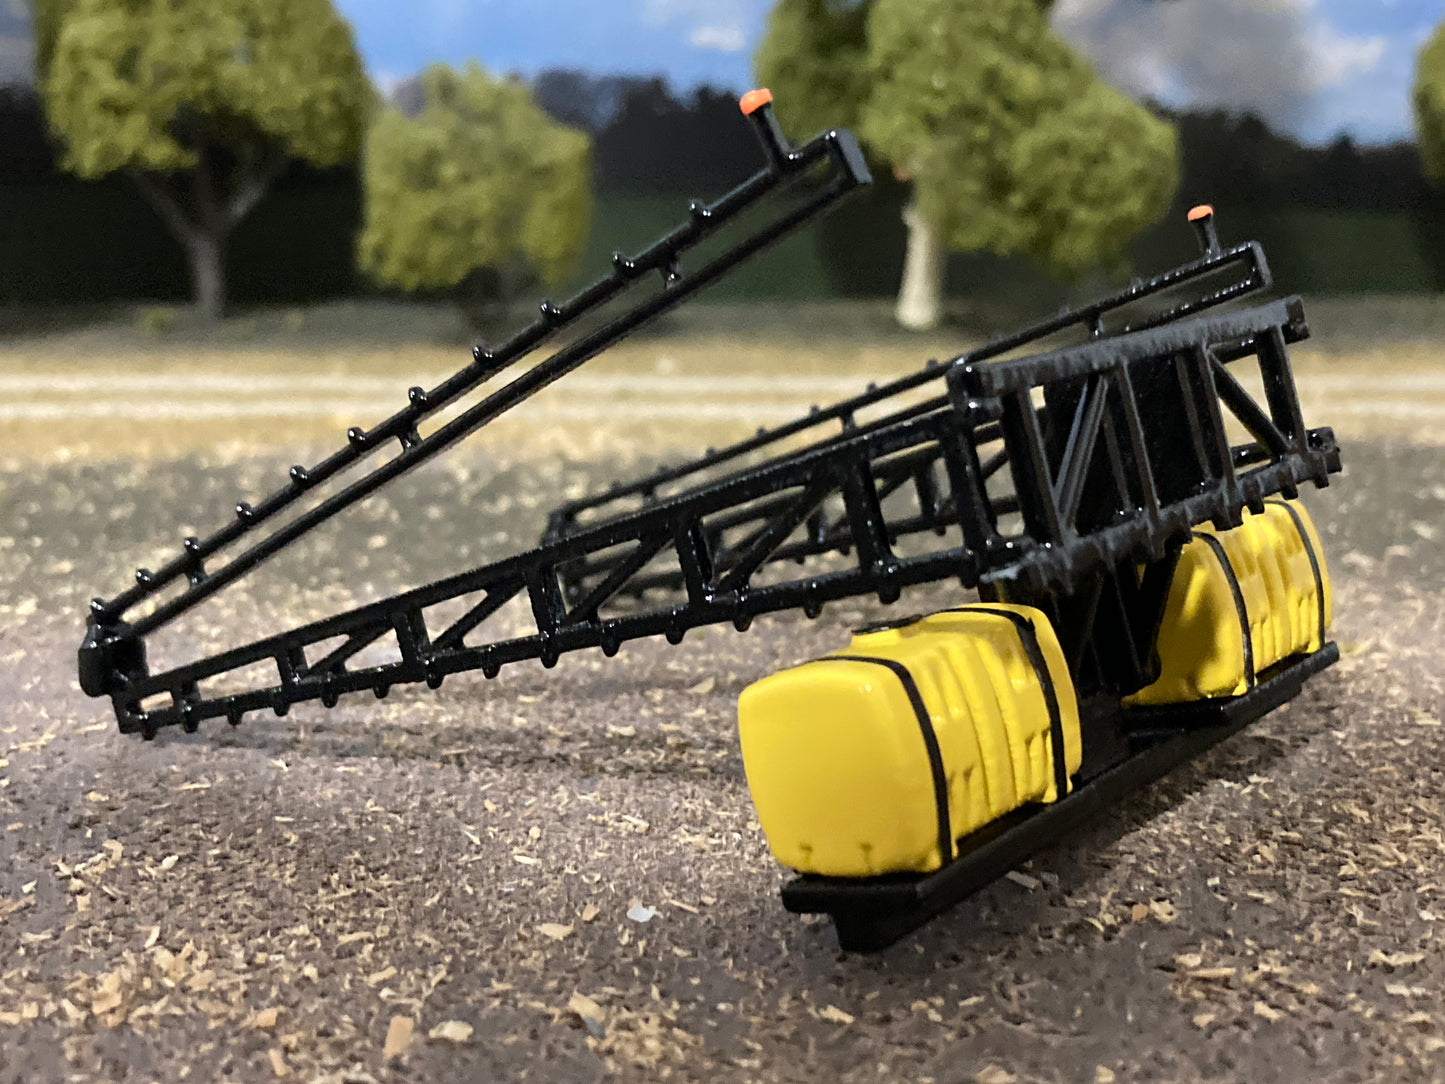 1/64 3pt. Sprayer 90ft for Tractors (fits Moore’s 3pt Hitch)